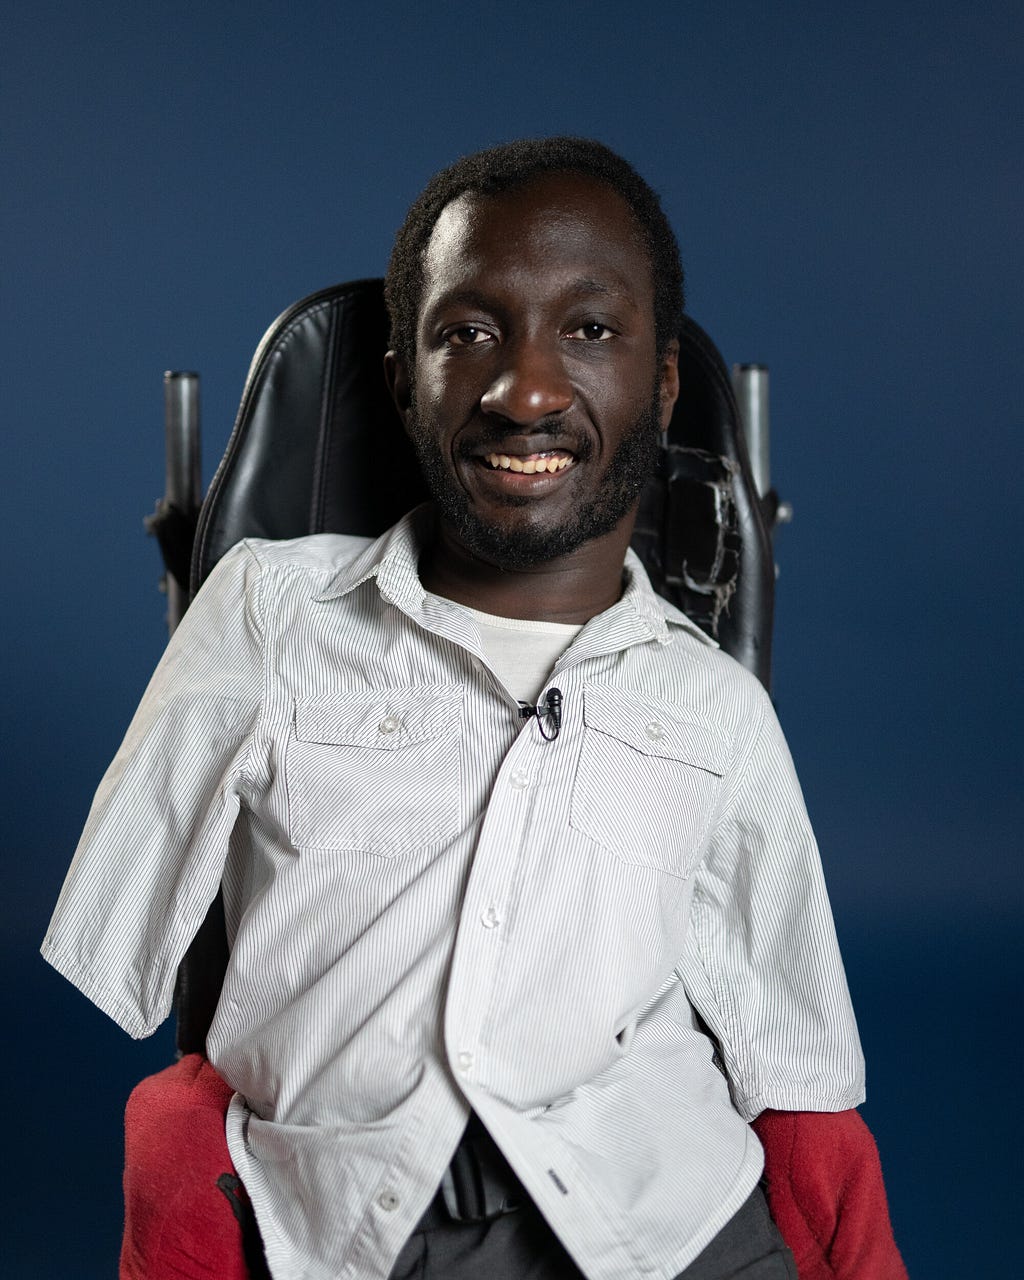 A smiling Black man sits in his wheelchair in front of a blue background.